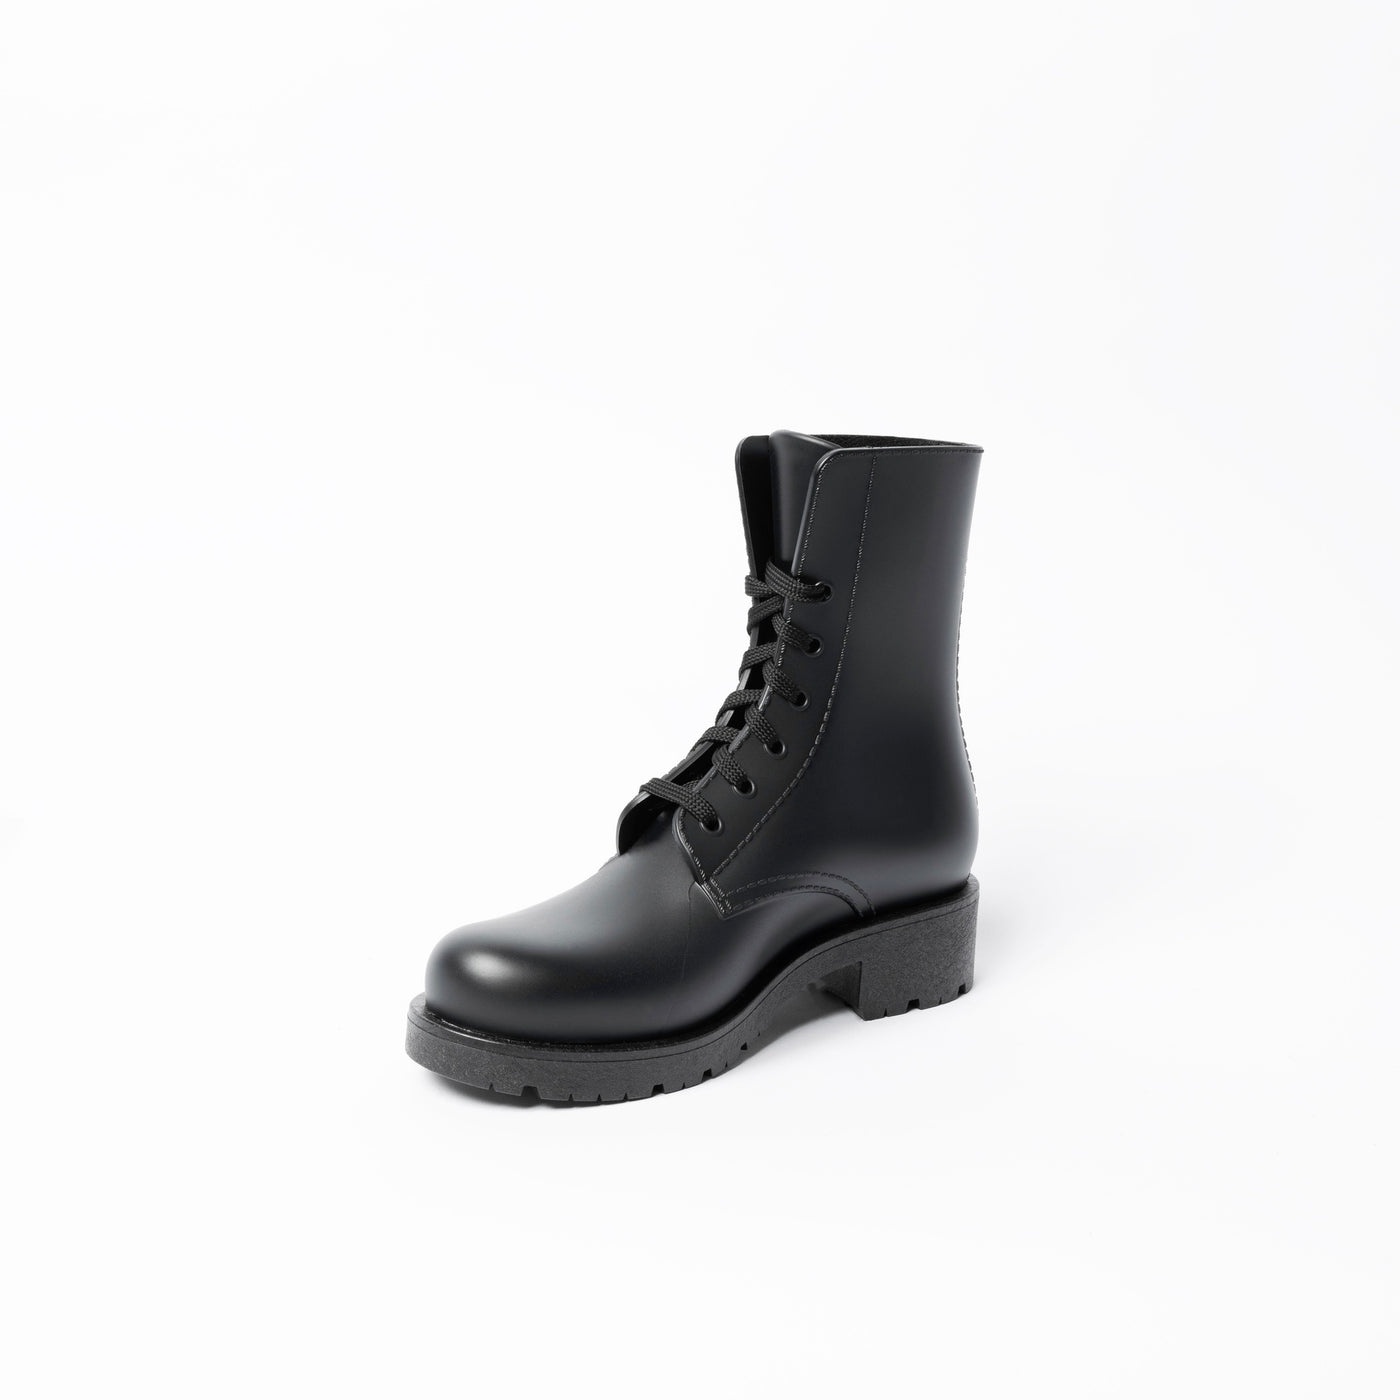 Storm Rubber Boots